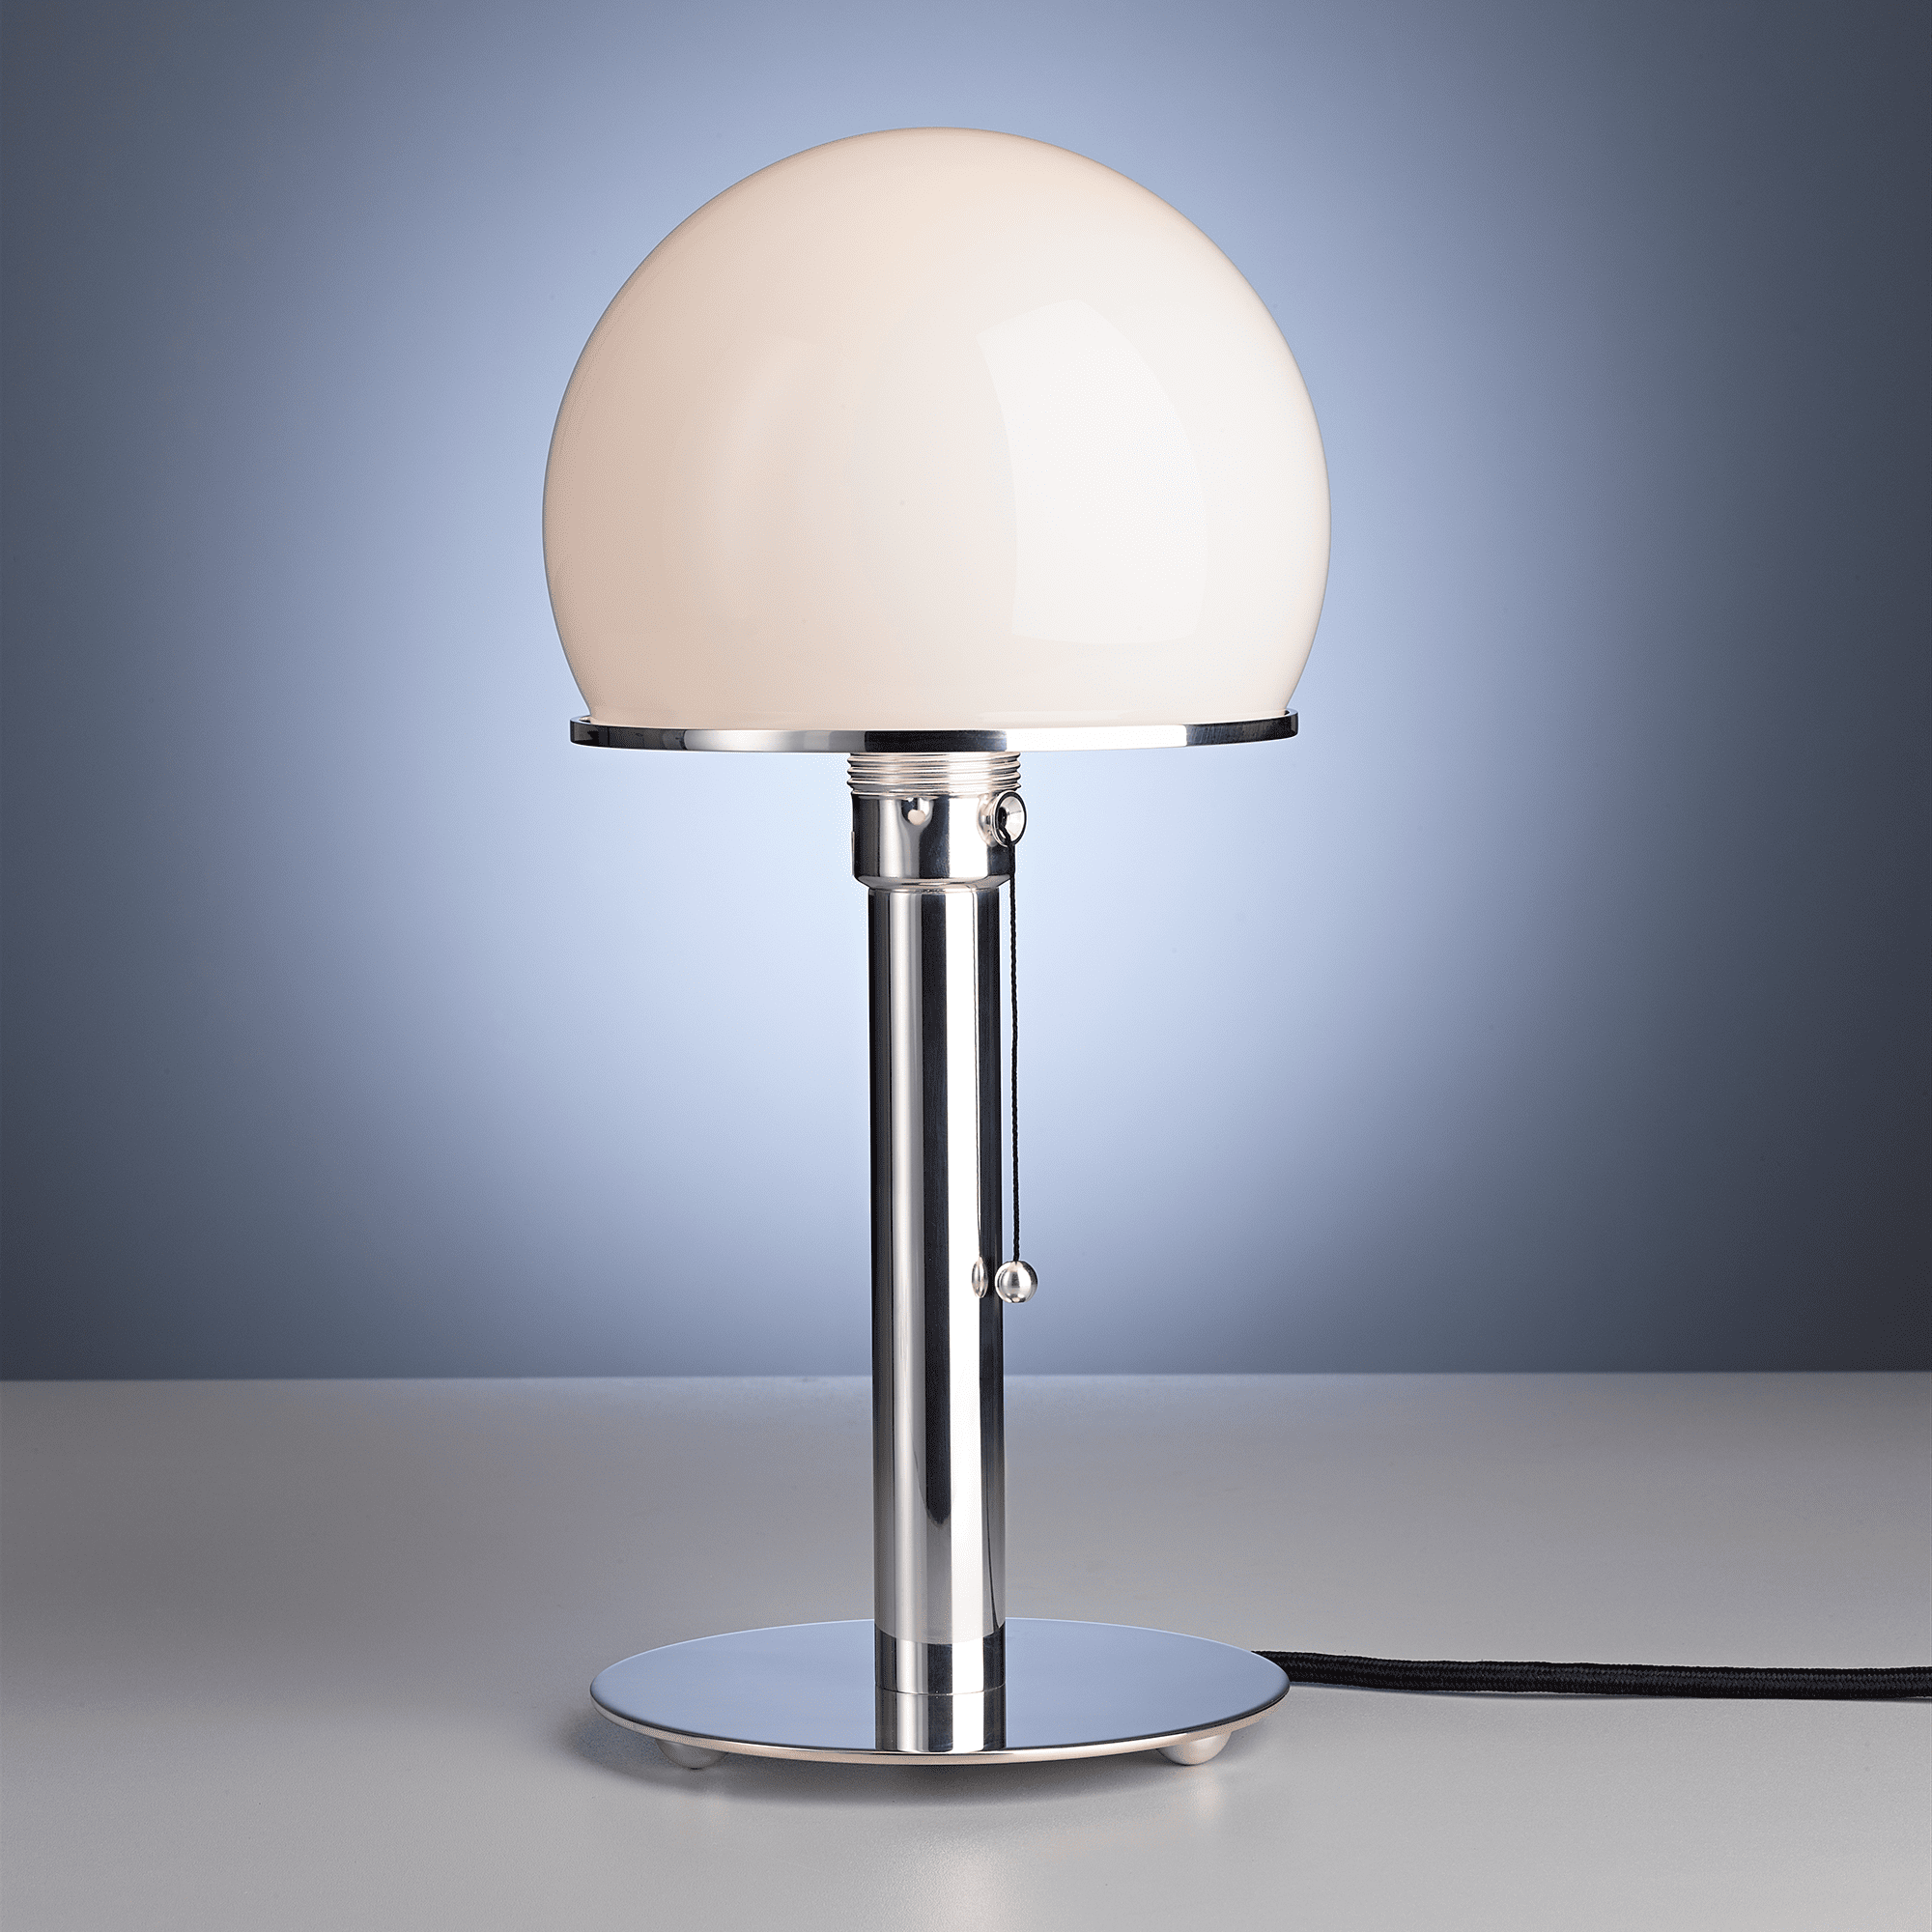 Wagenfeld table lamp WA 24 - Special Edition的图片
